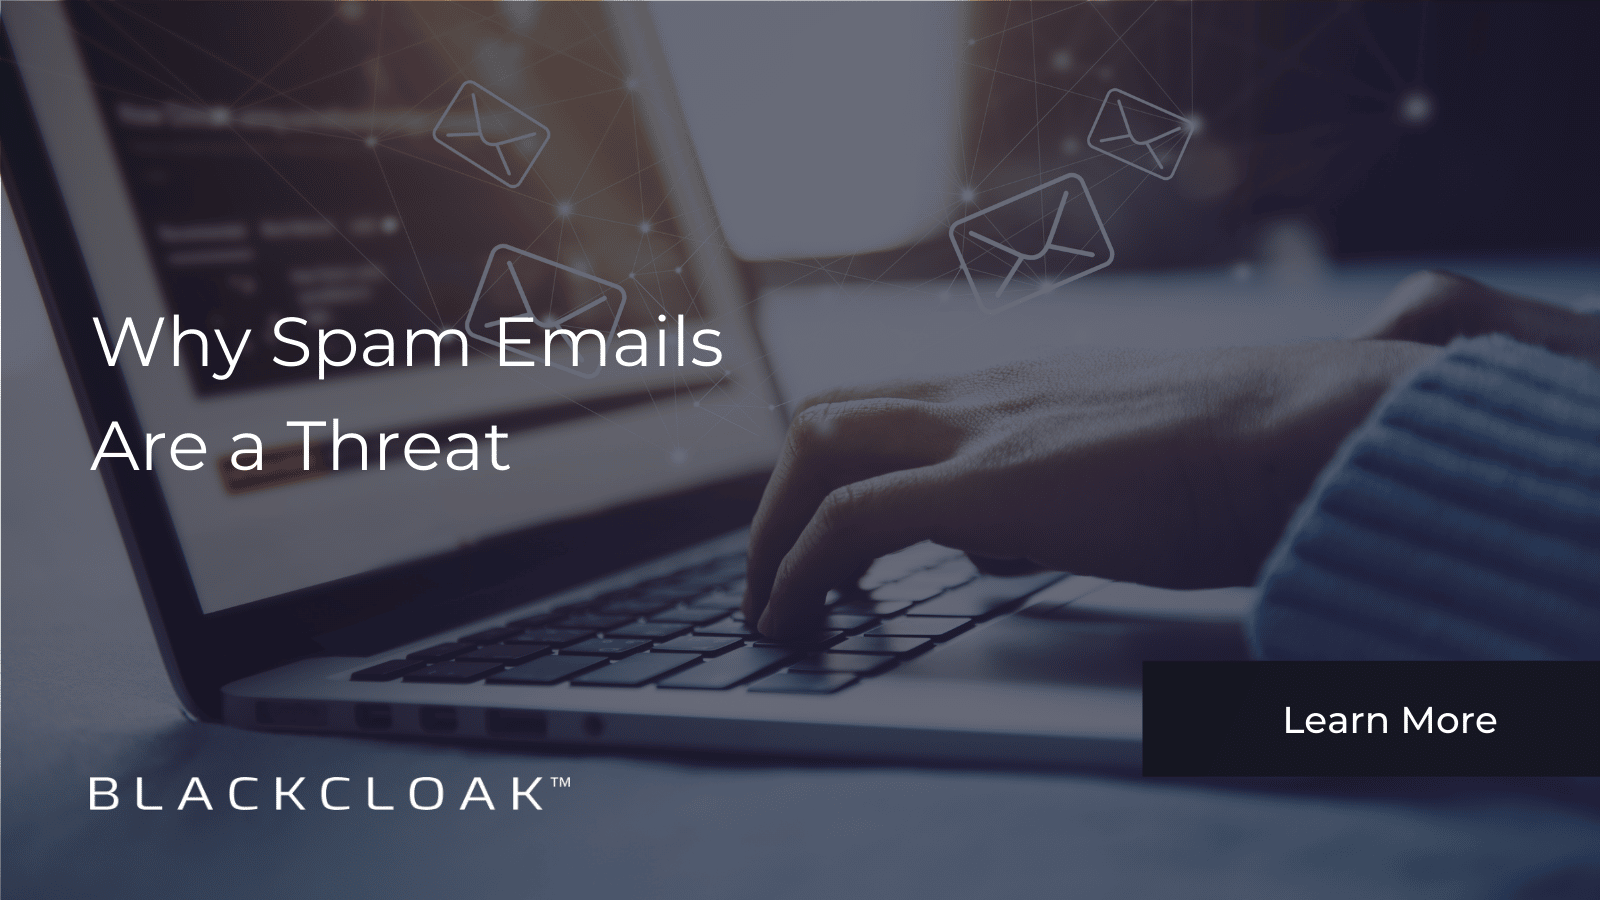 Why spam emails are a threat